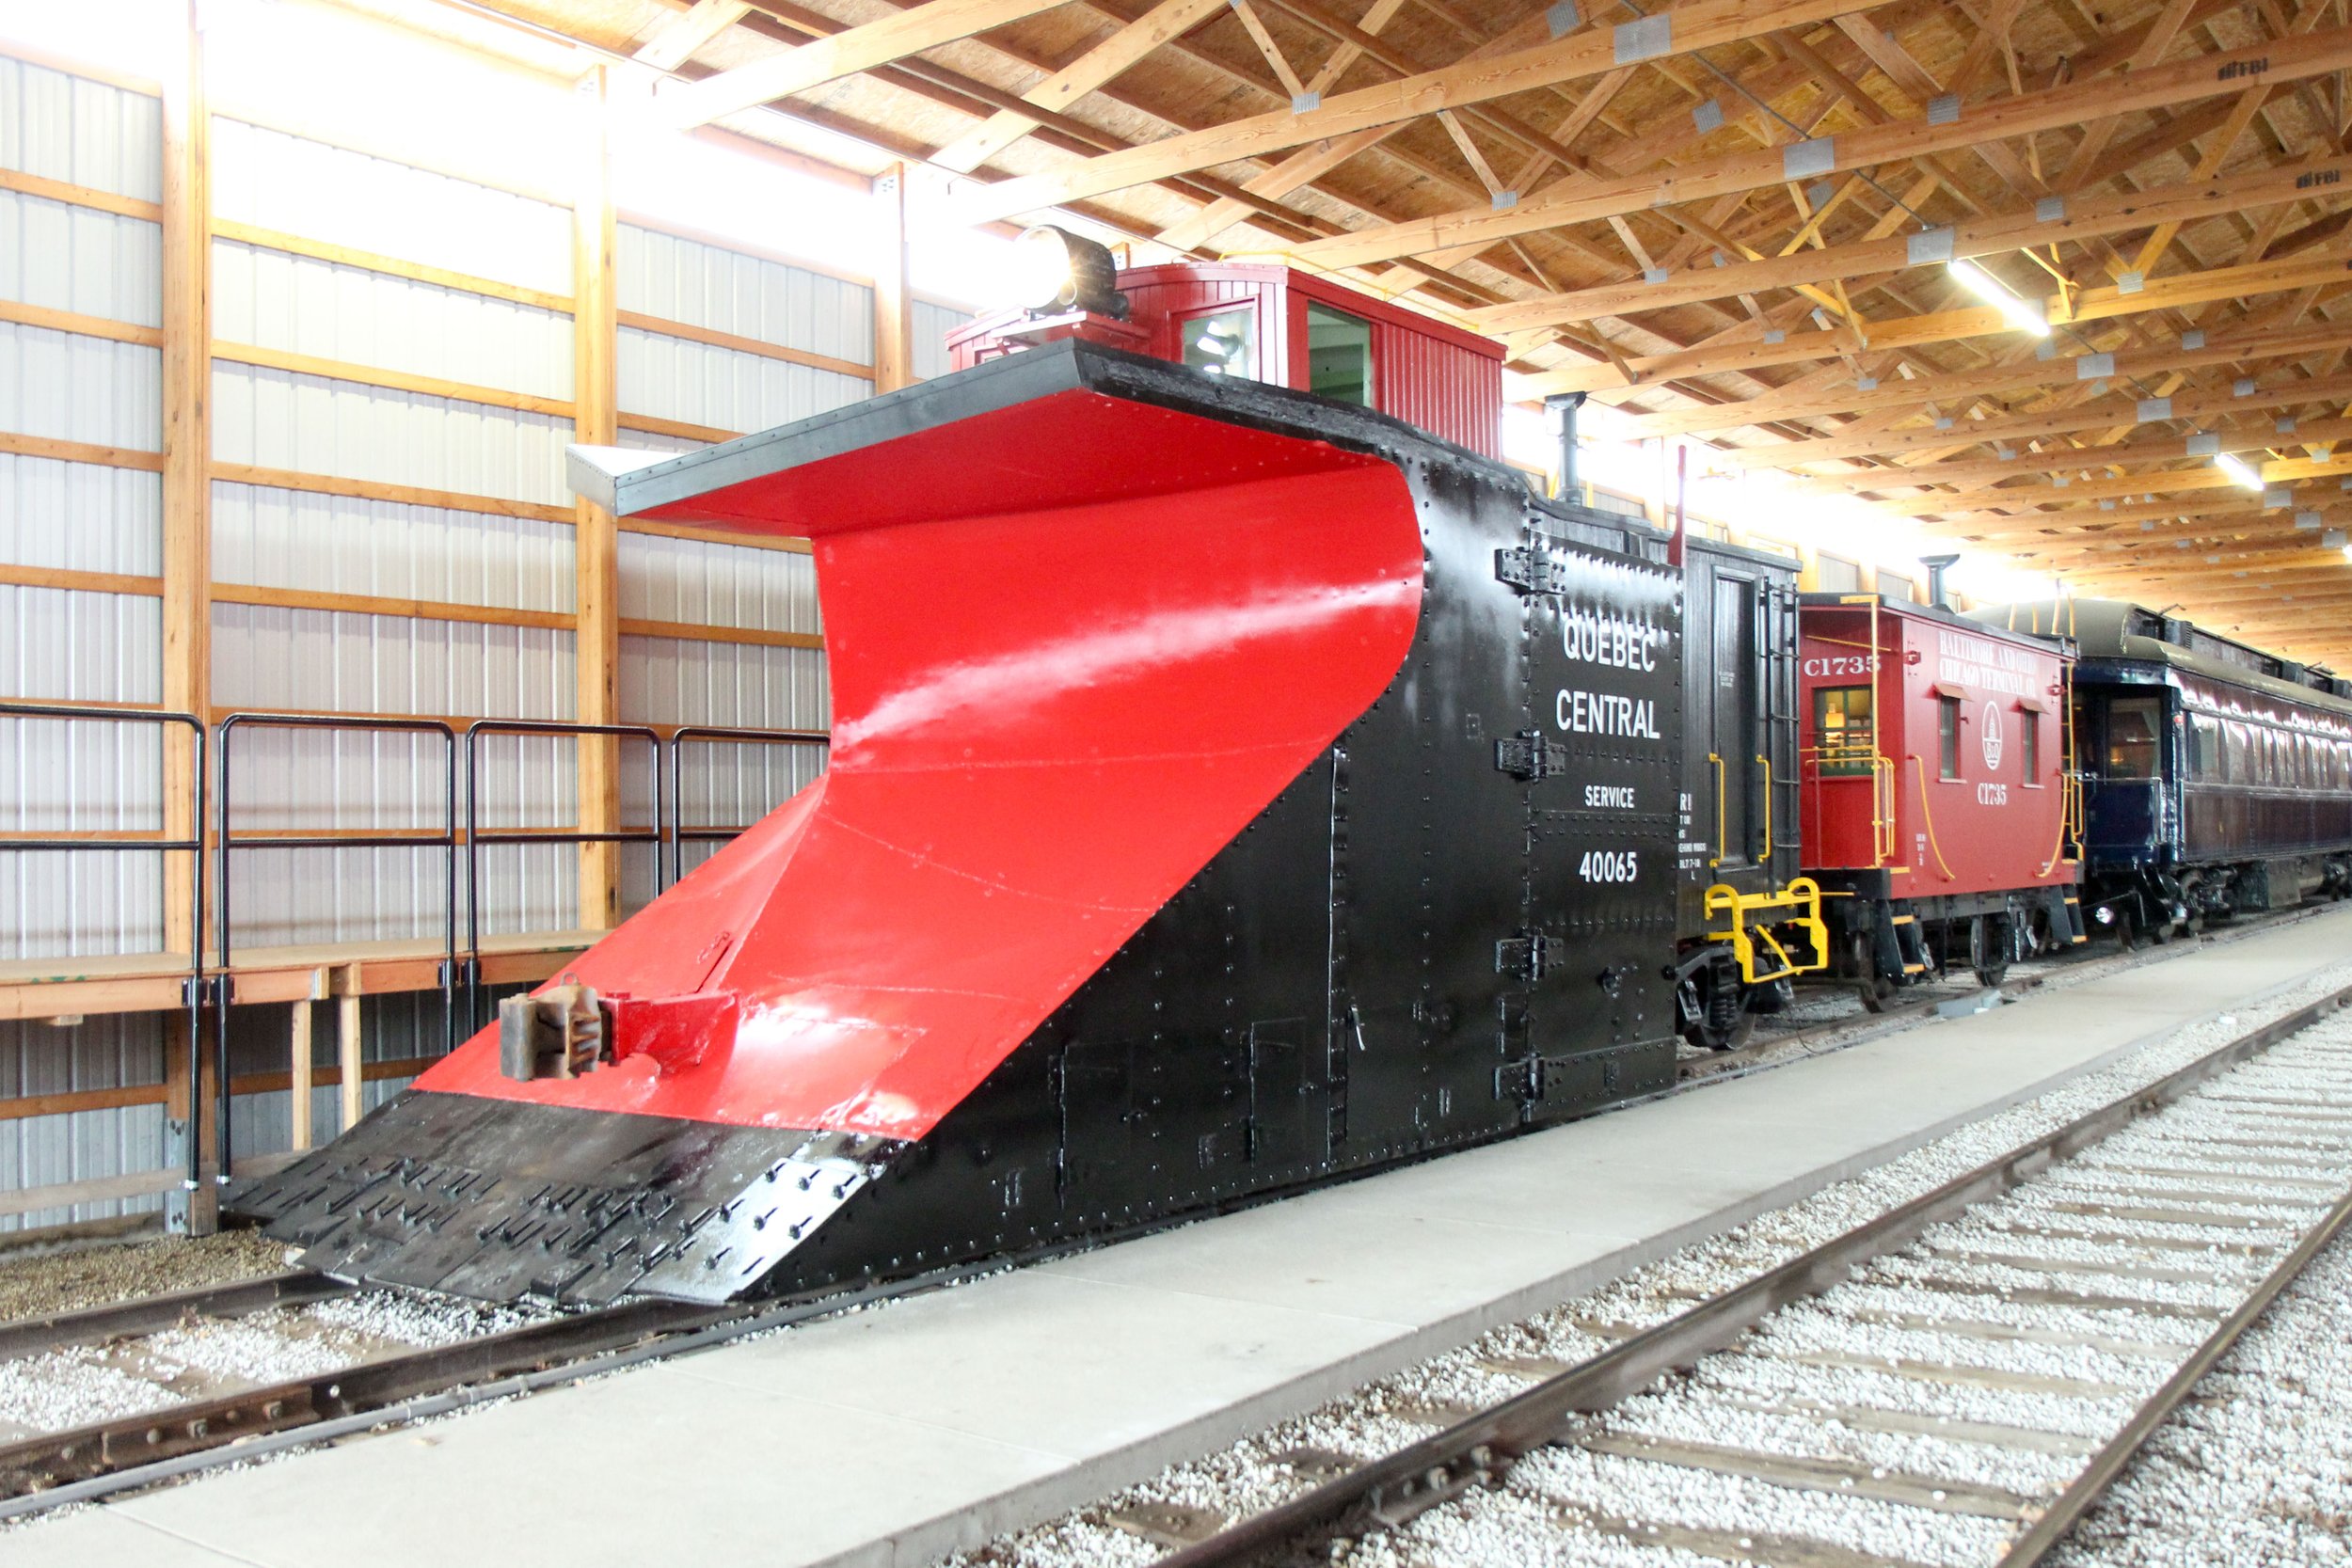  The restoration is complete and the snow plow has been on display inside the display barn. Visitors can explore inside the plow and learn about the role snowplow played in the history of railroading.  